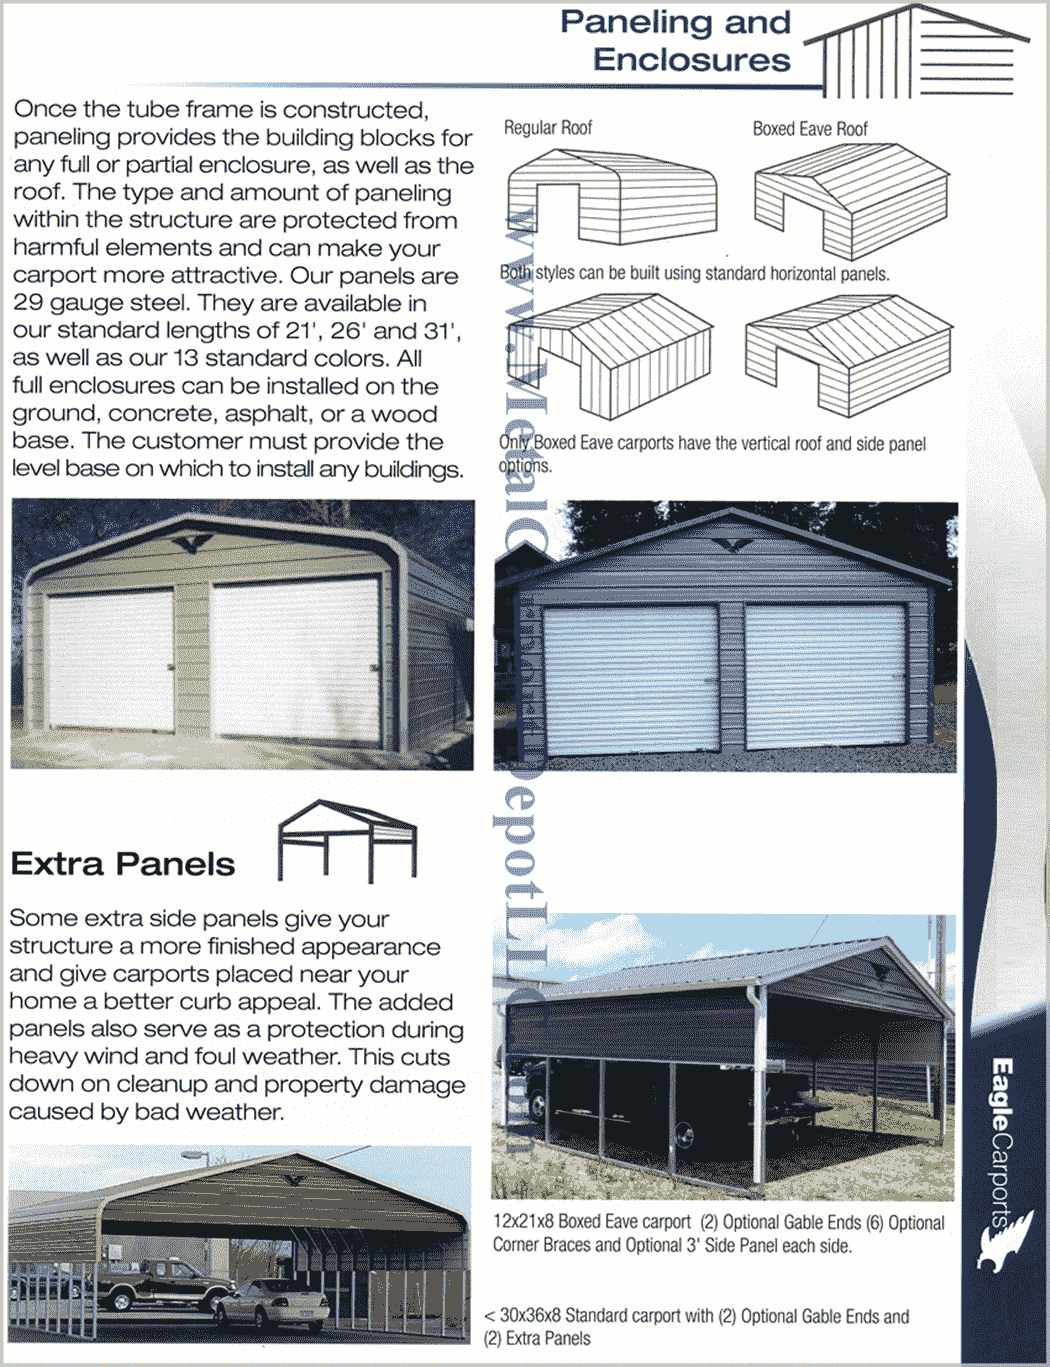 Paneling and Enclosure Information